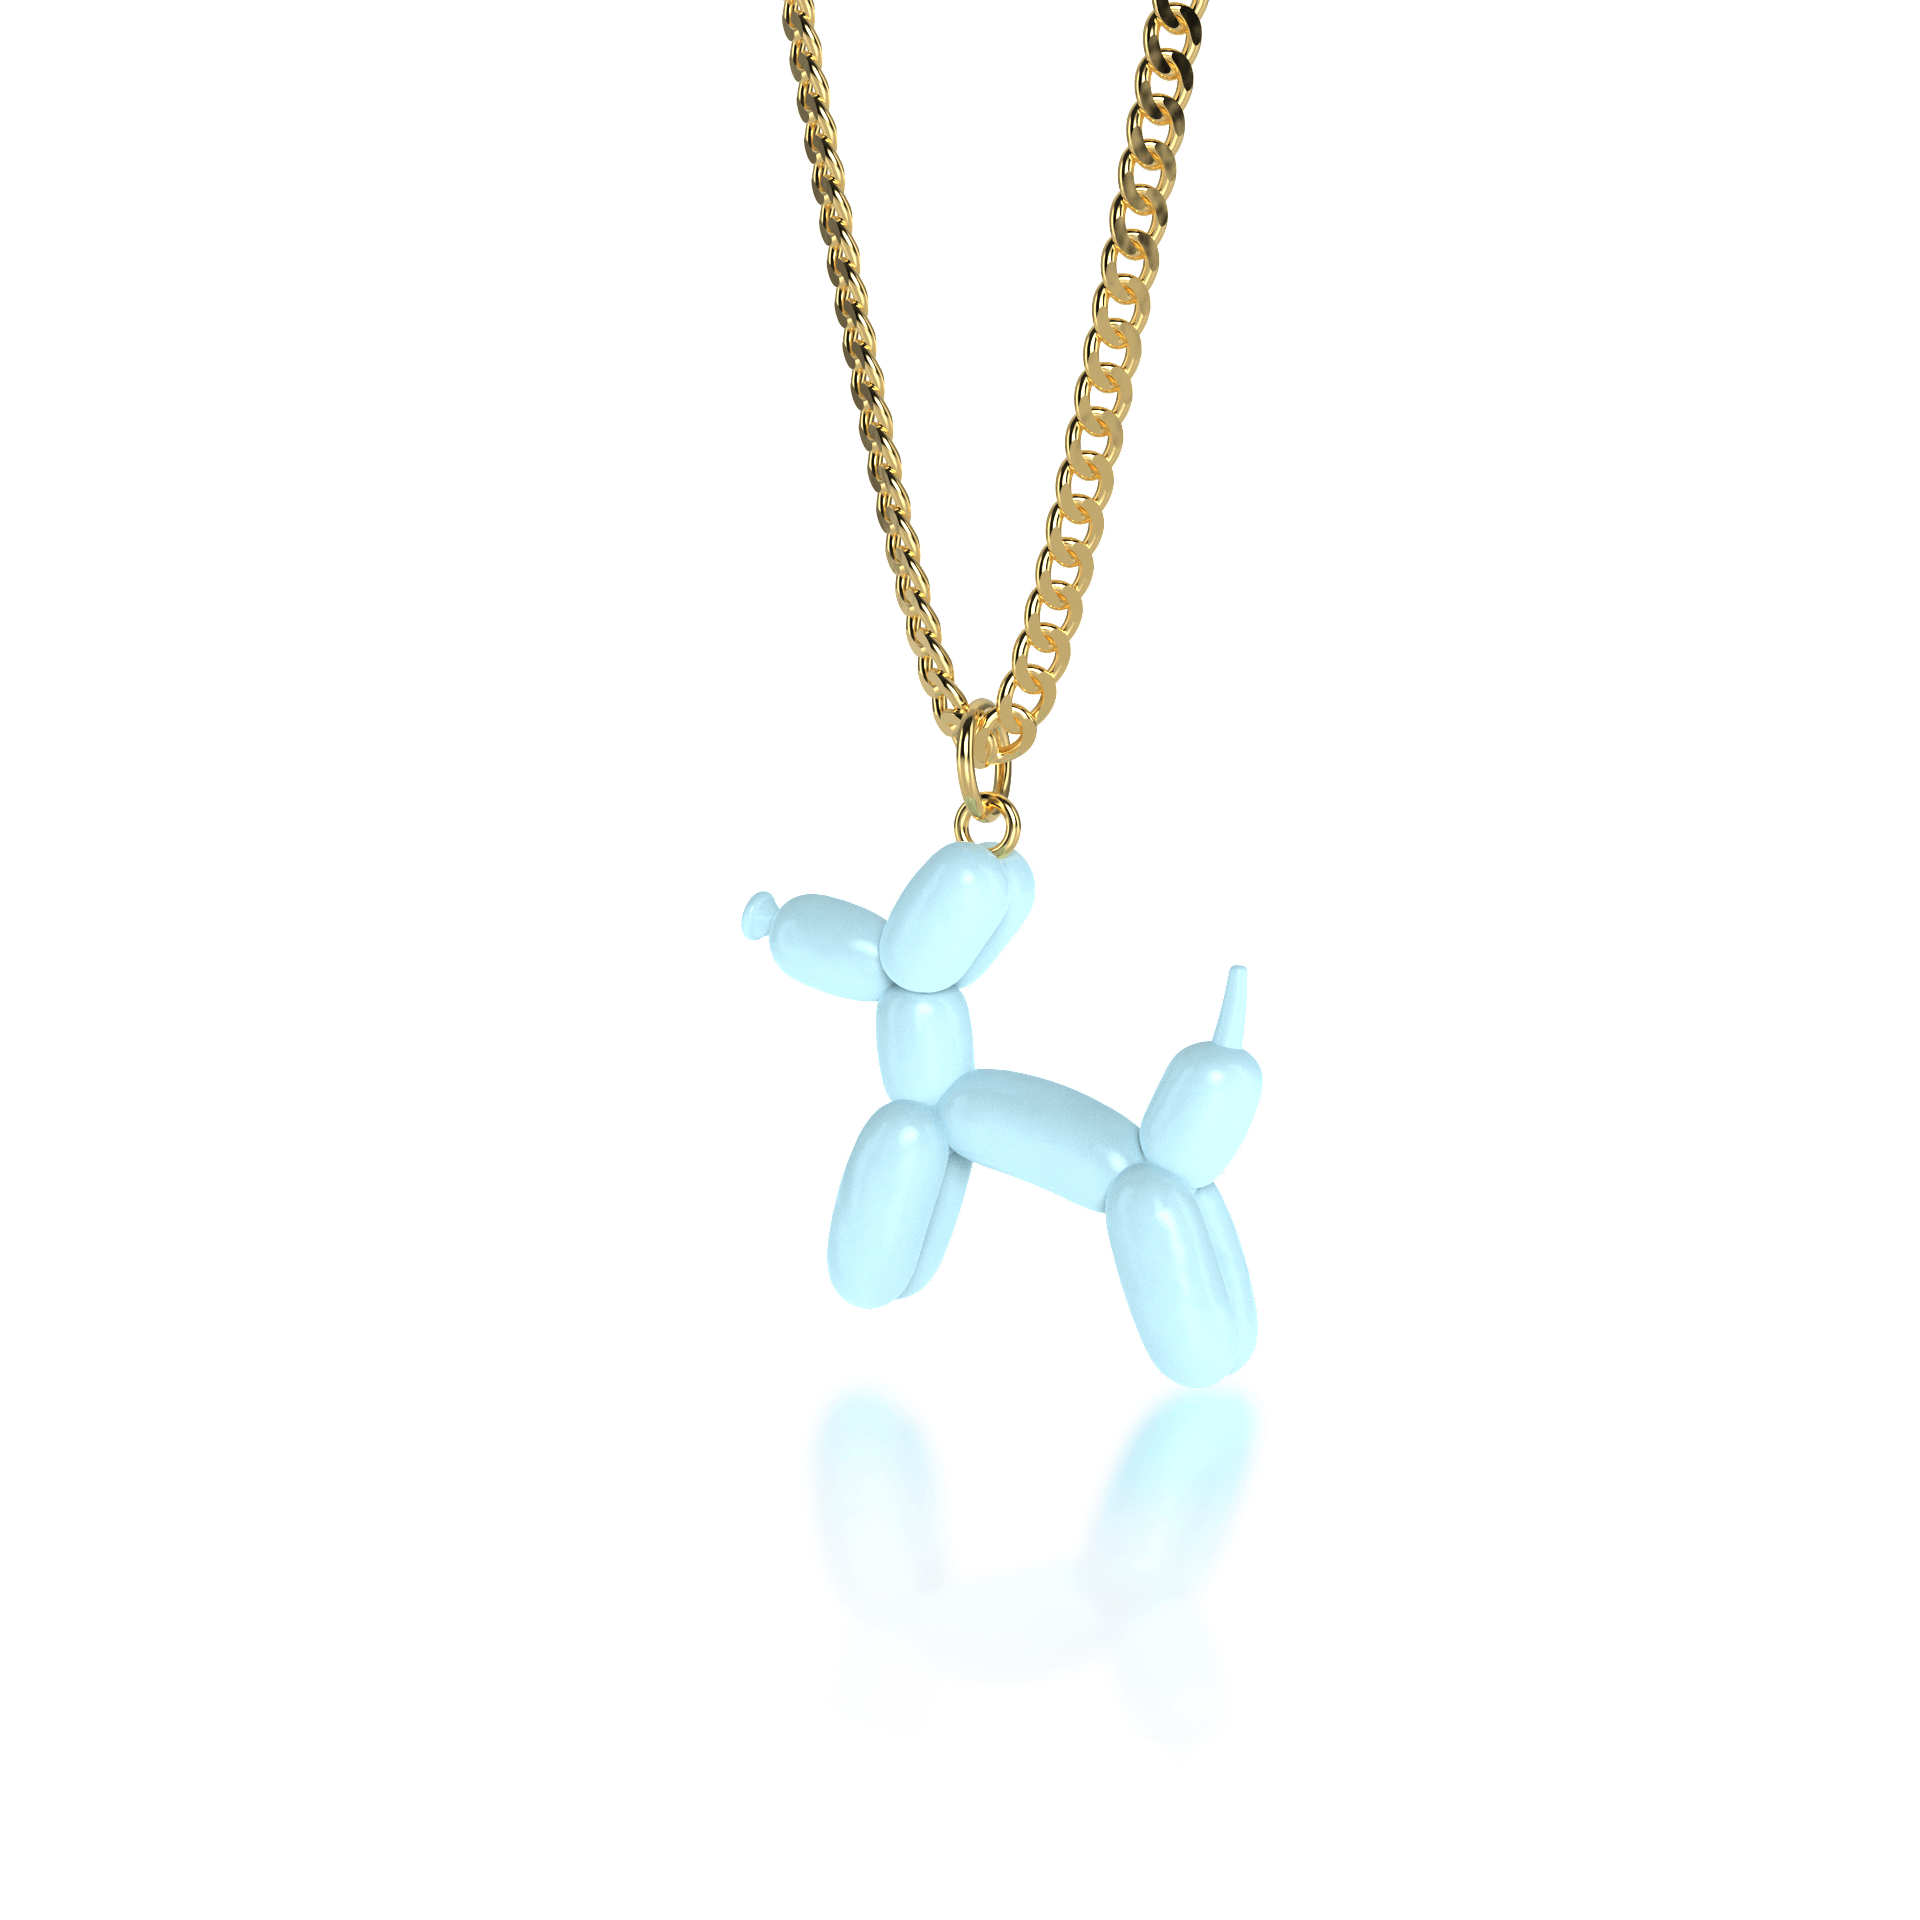 Balloon Doggy Necklace in COLORS